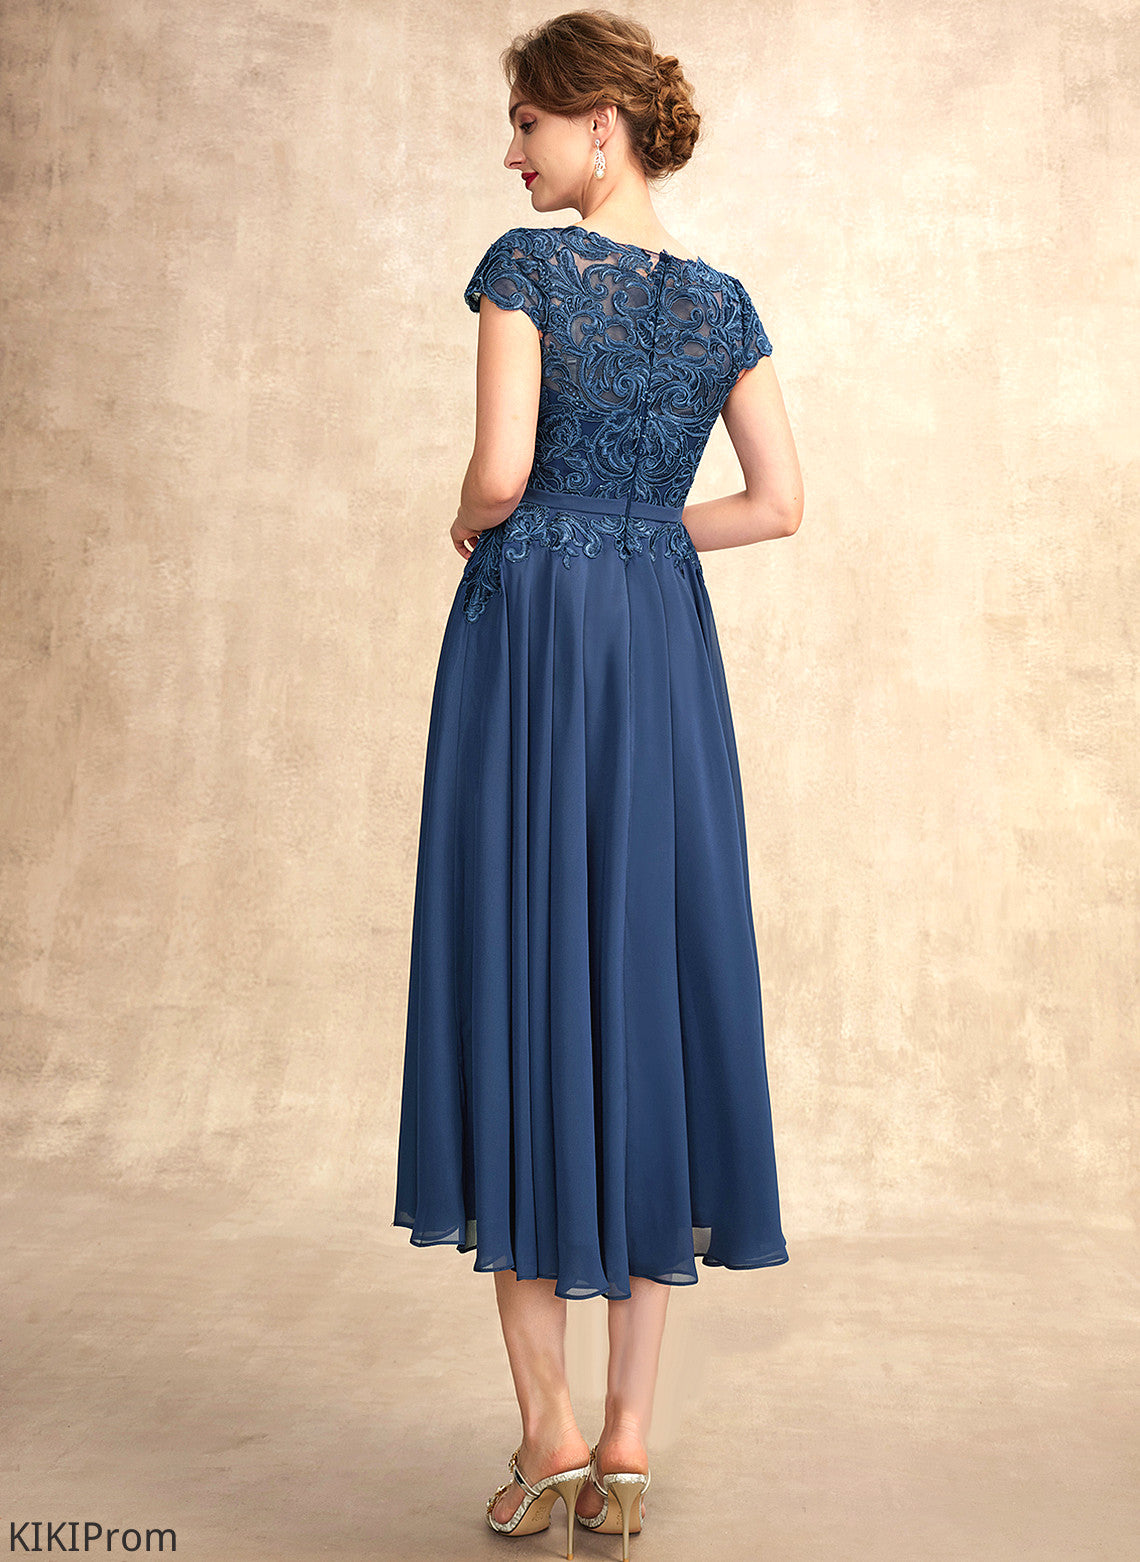 Mother of Chiffon the Gwen A-Line Tea-Length Lace Dress Scoop Bride Mother of the Bride Dresses Neck